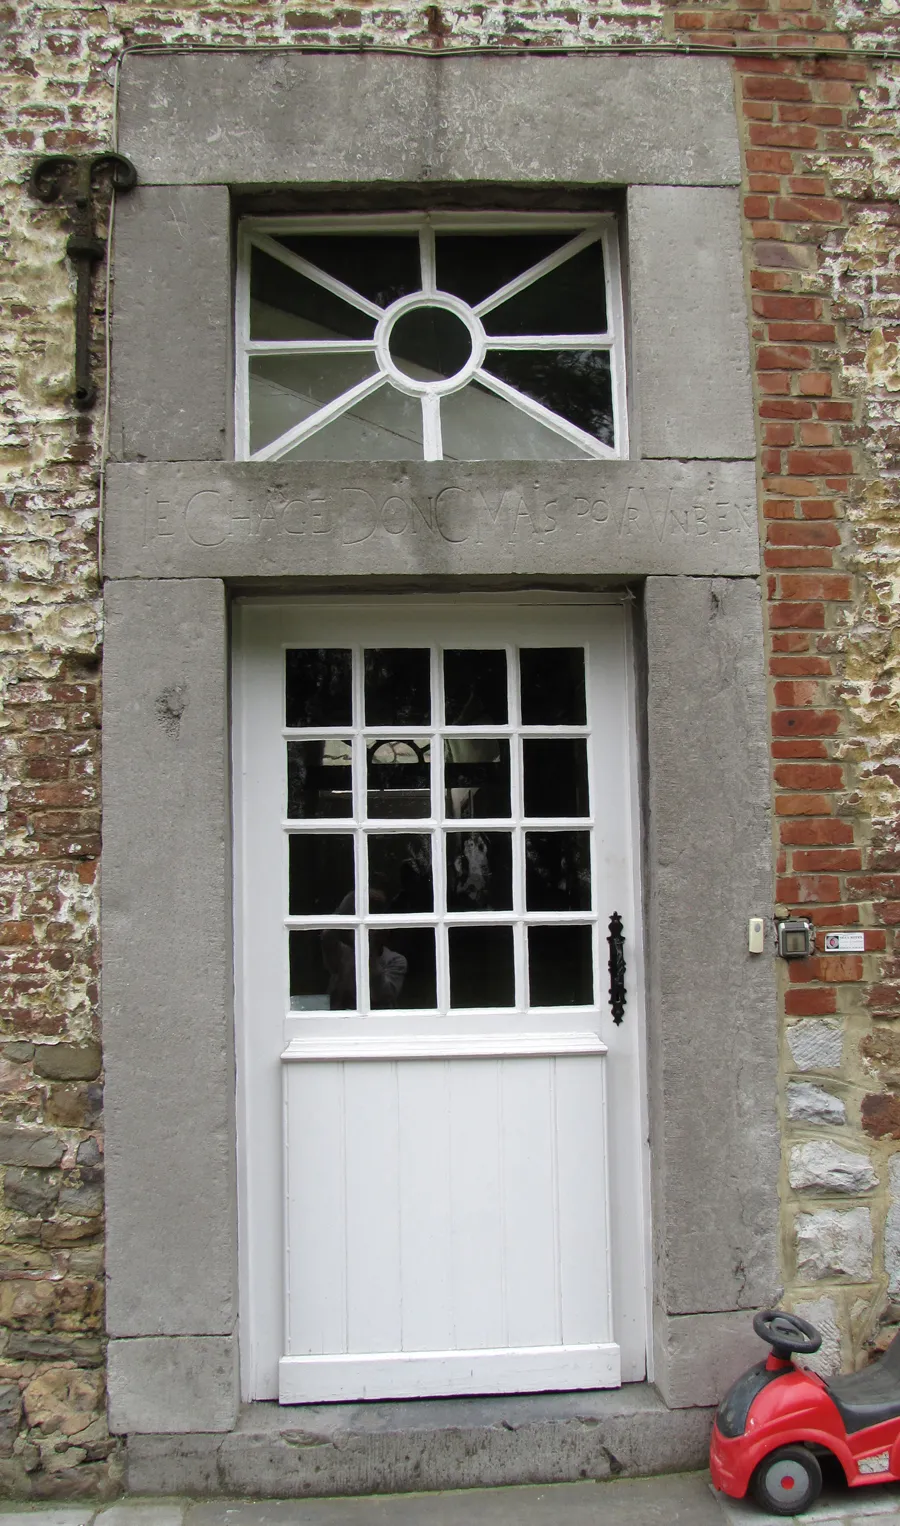 Photo showing: One of the two doors with chronogram of the farm of St. Barbe in Clermont-sous-Huy, Belgium, 1713.